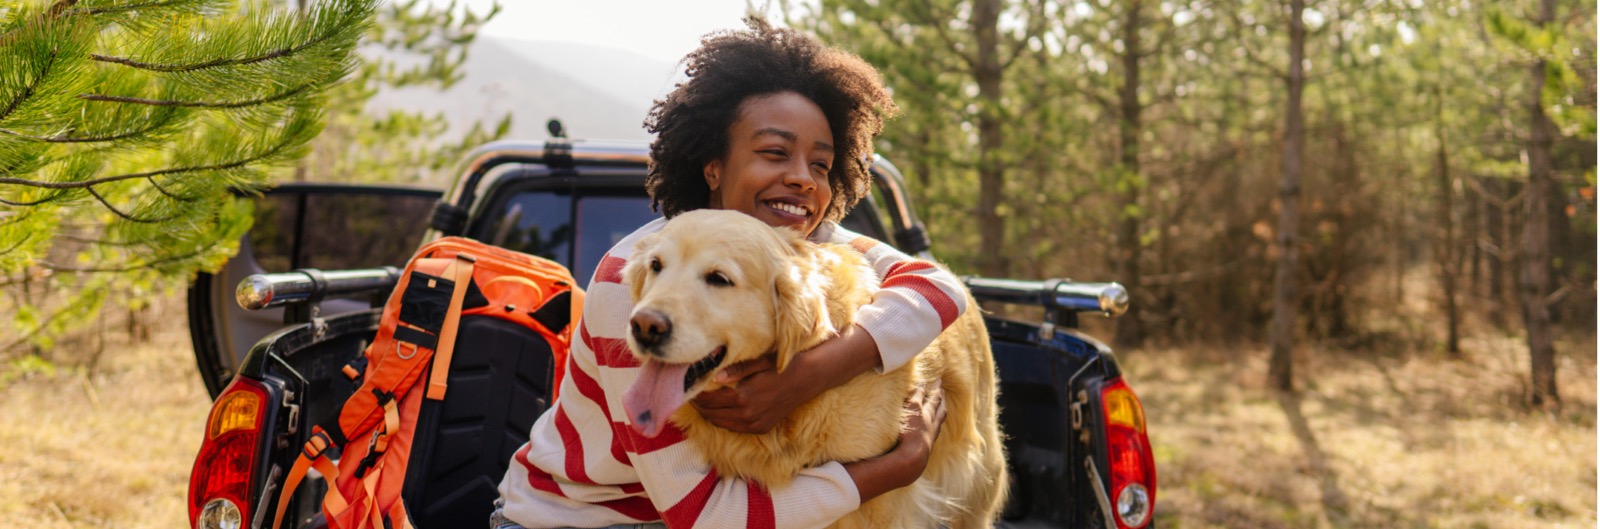 young-woman-on-a-road-trip-with-her-best-friend-picture-1600x529.jpg